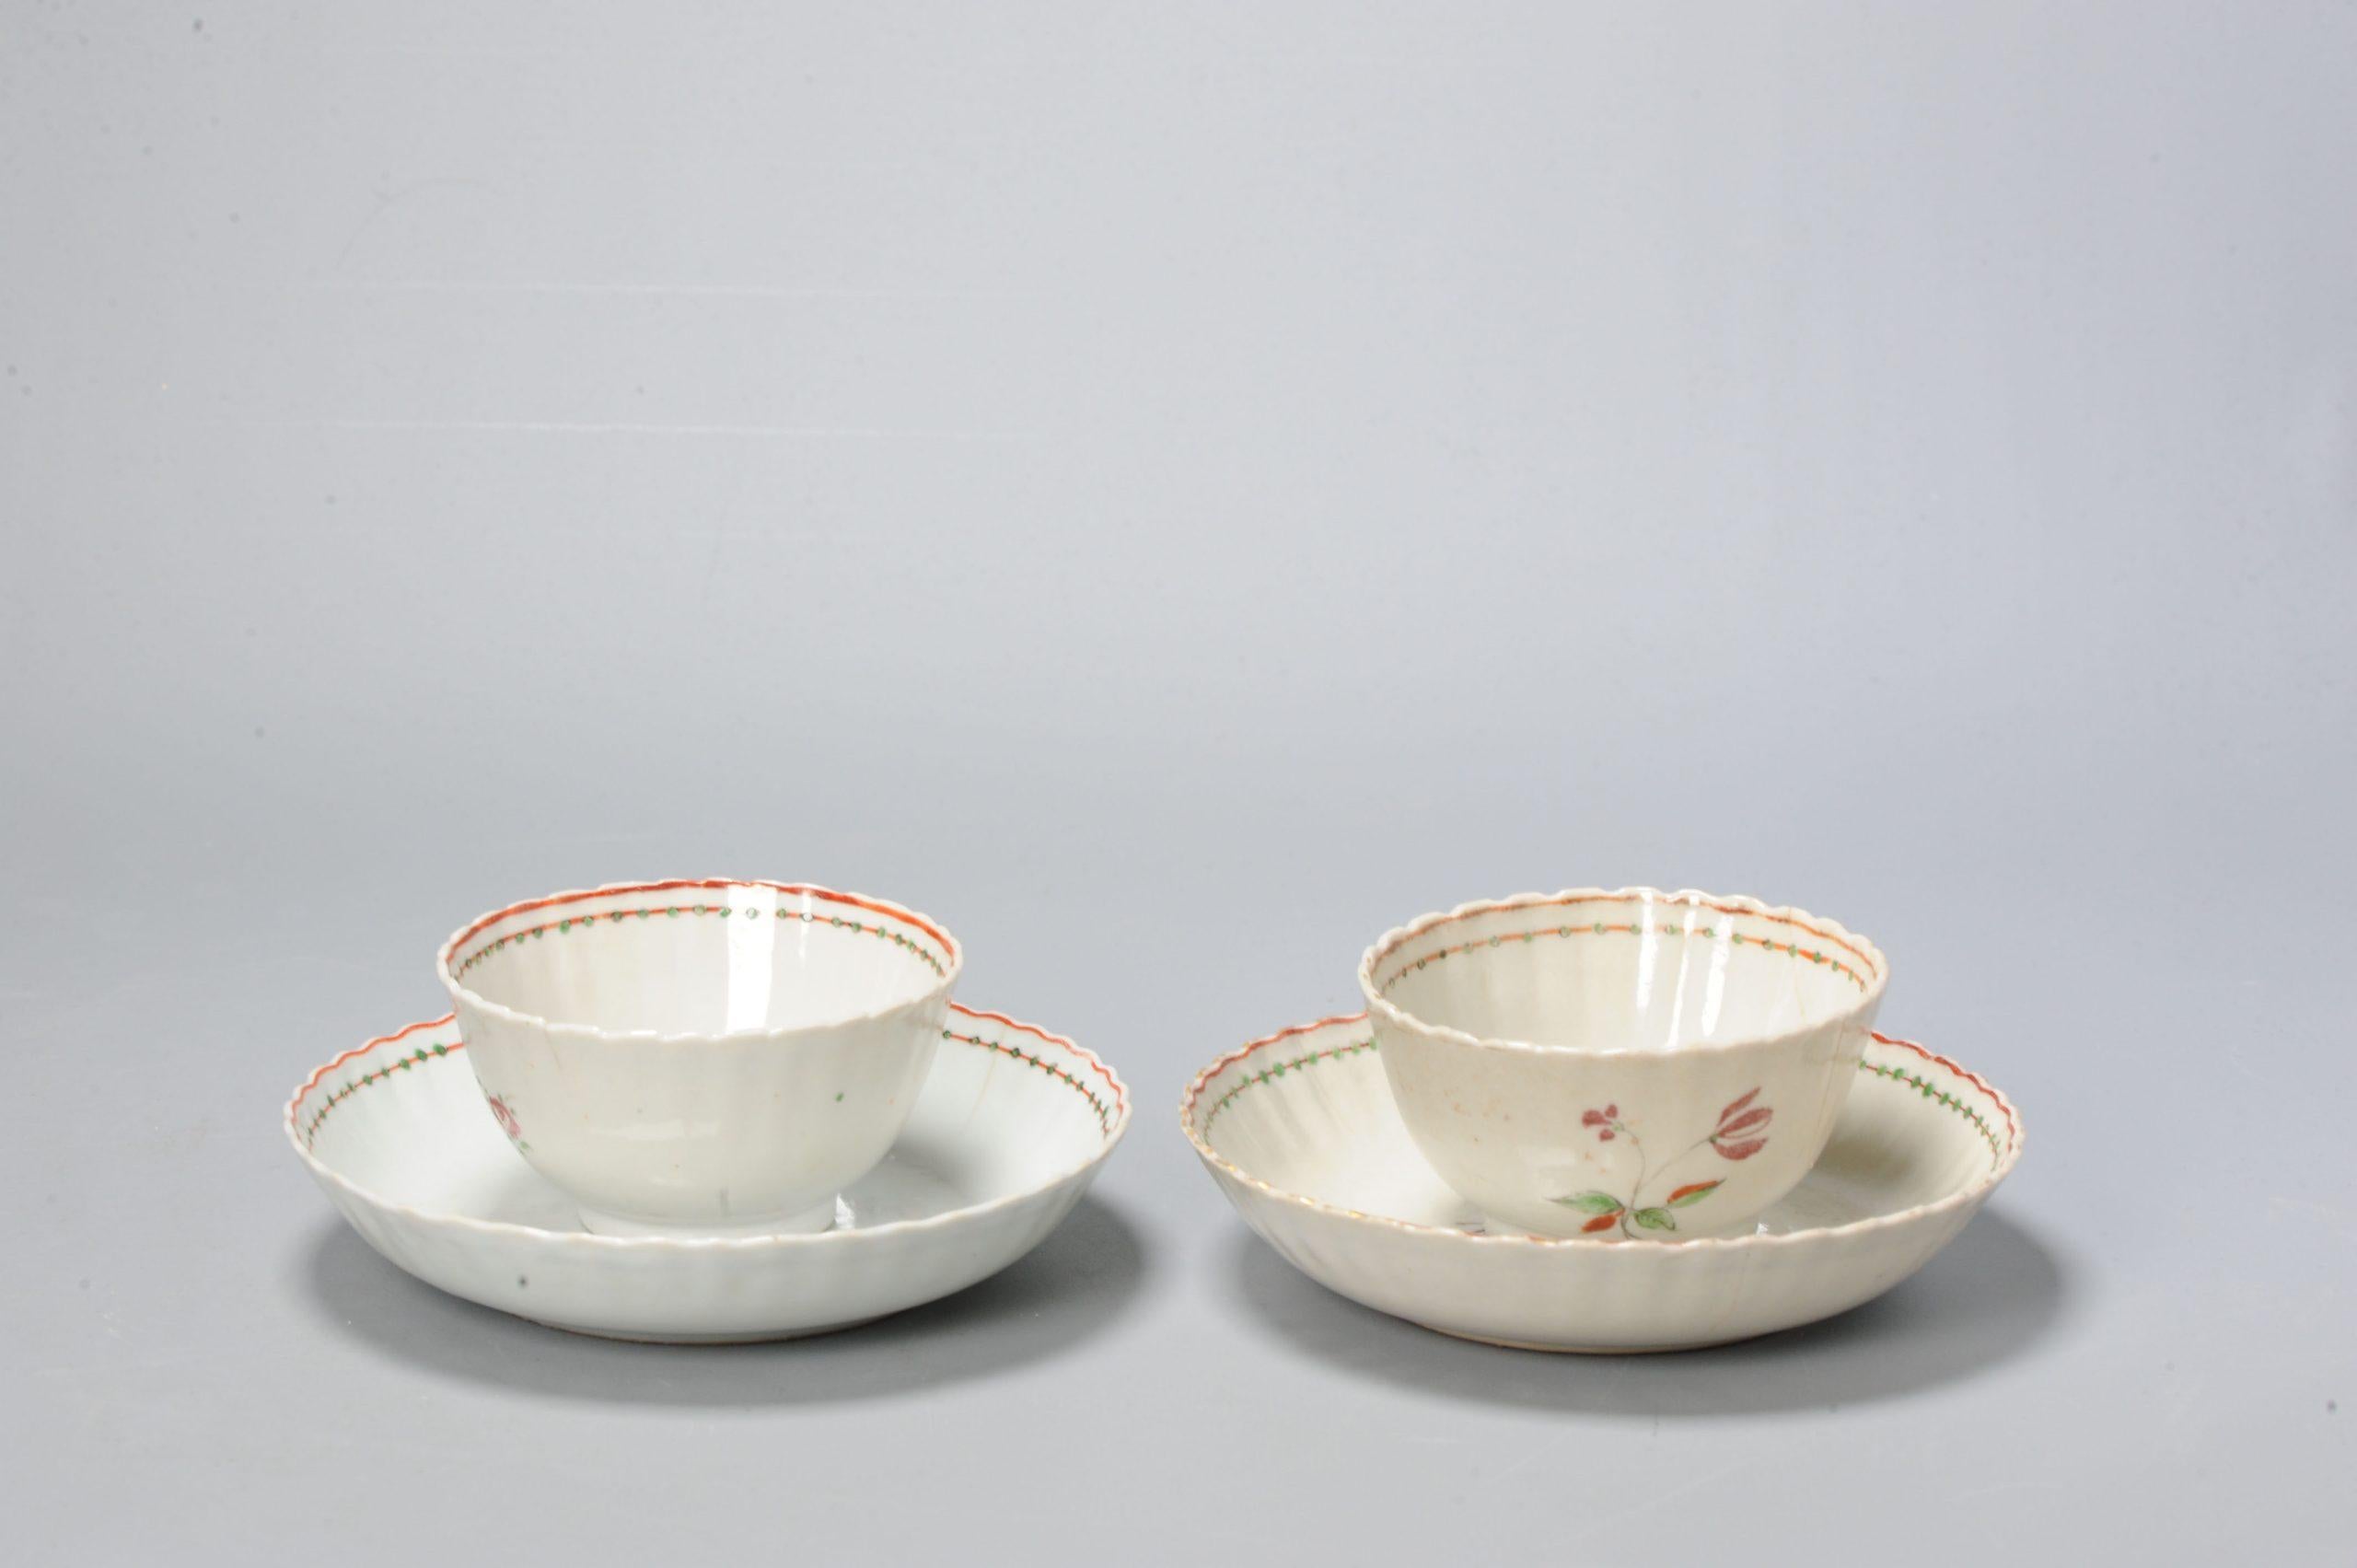 18th Century and Earlier Set of 4 Antique Chinese Porcelain Tea Set China Chine de Commande, 18th Century For Sale